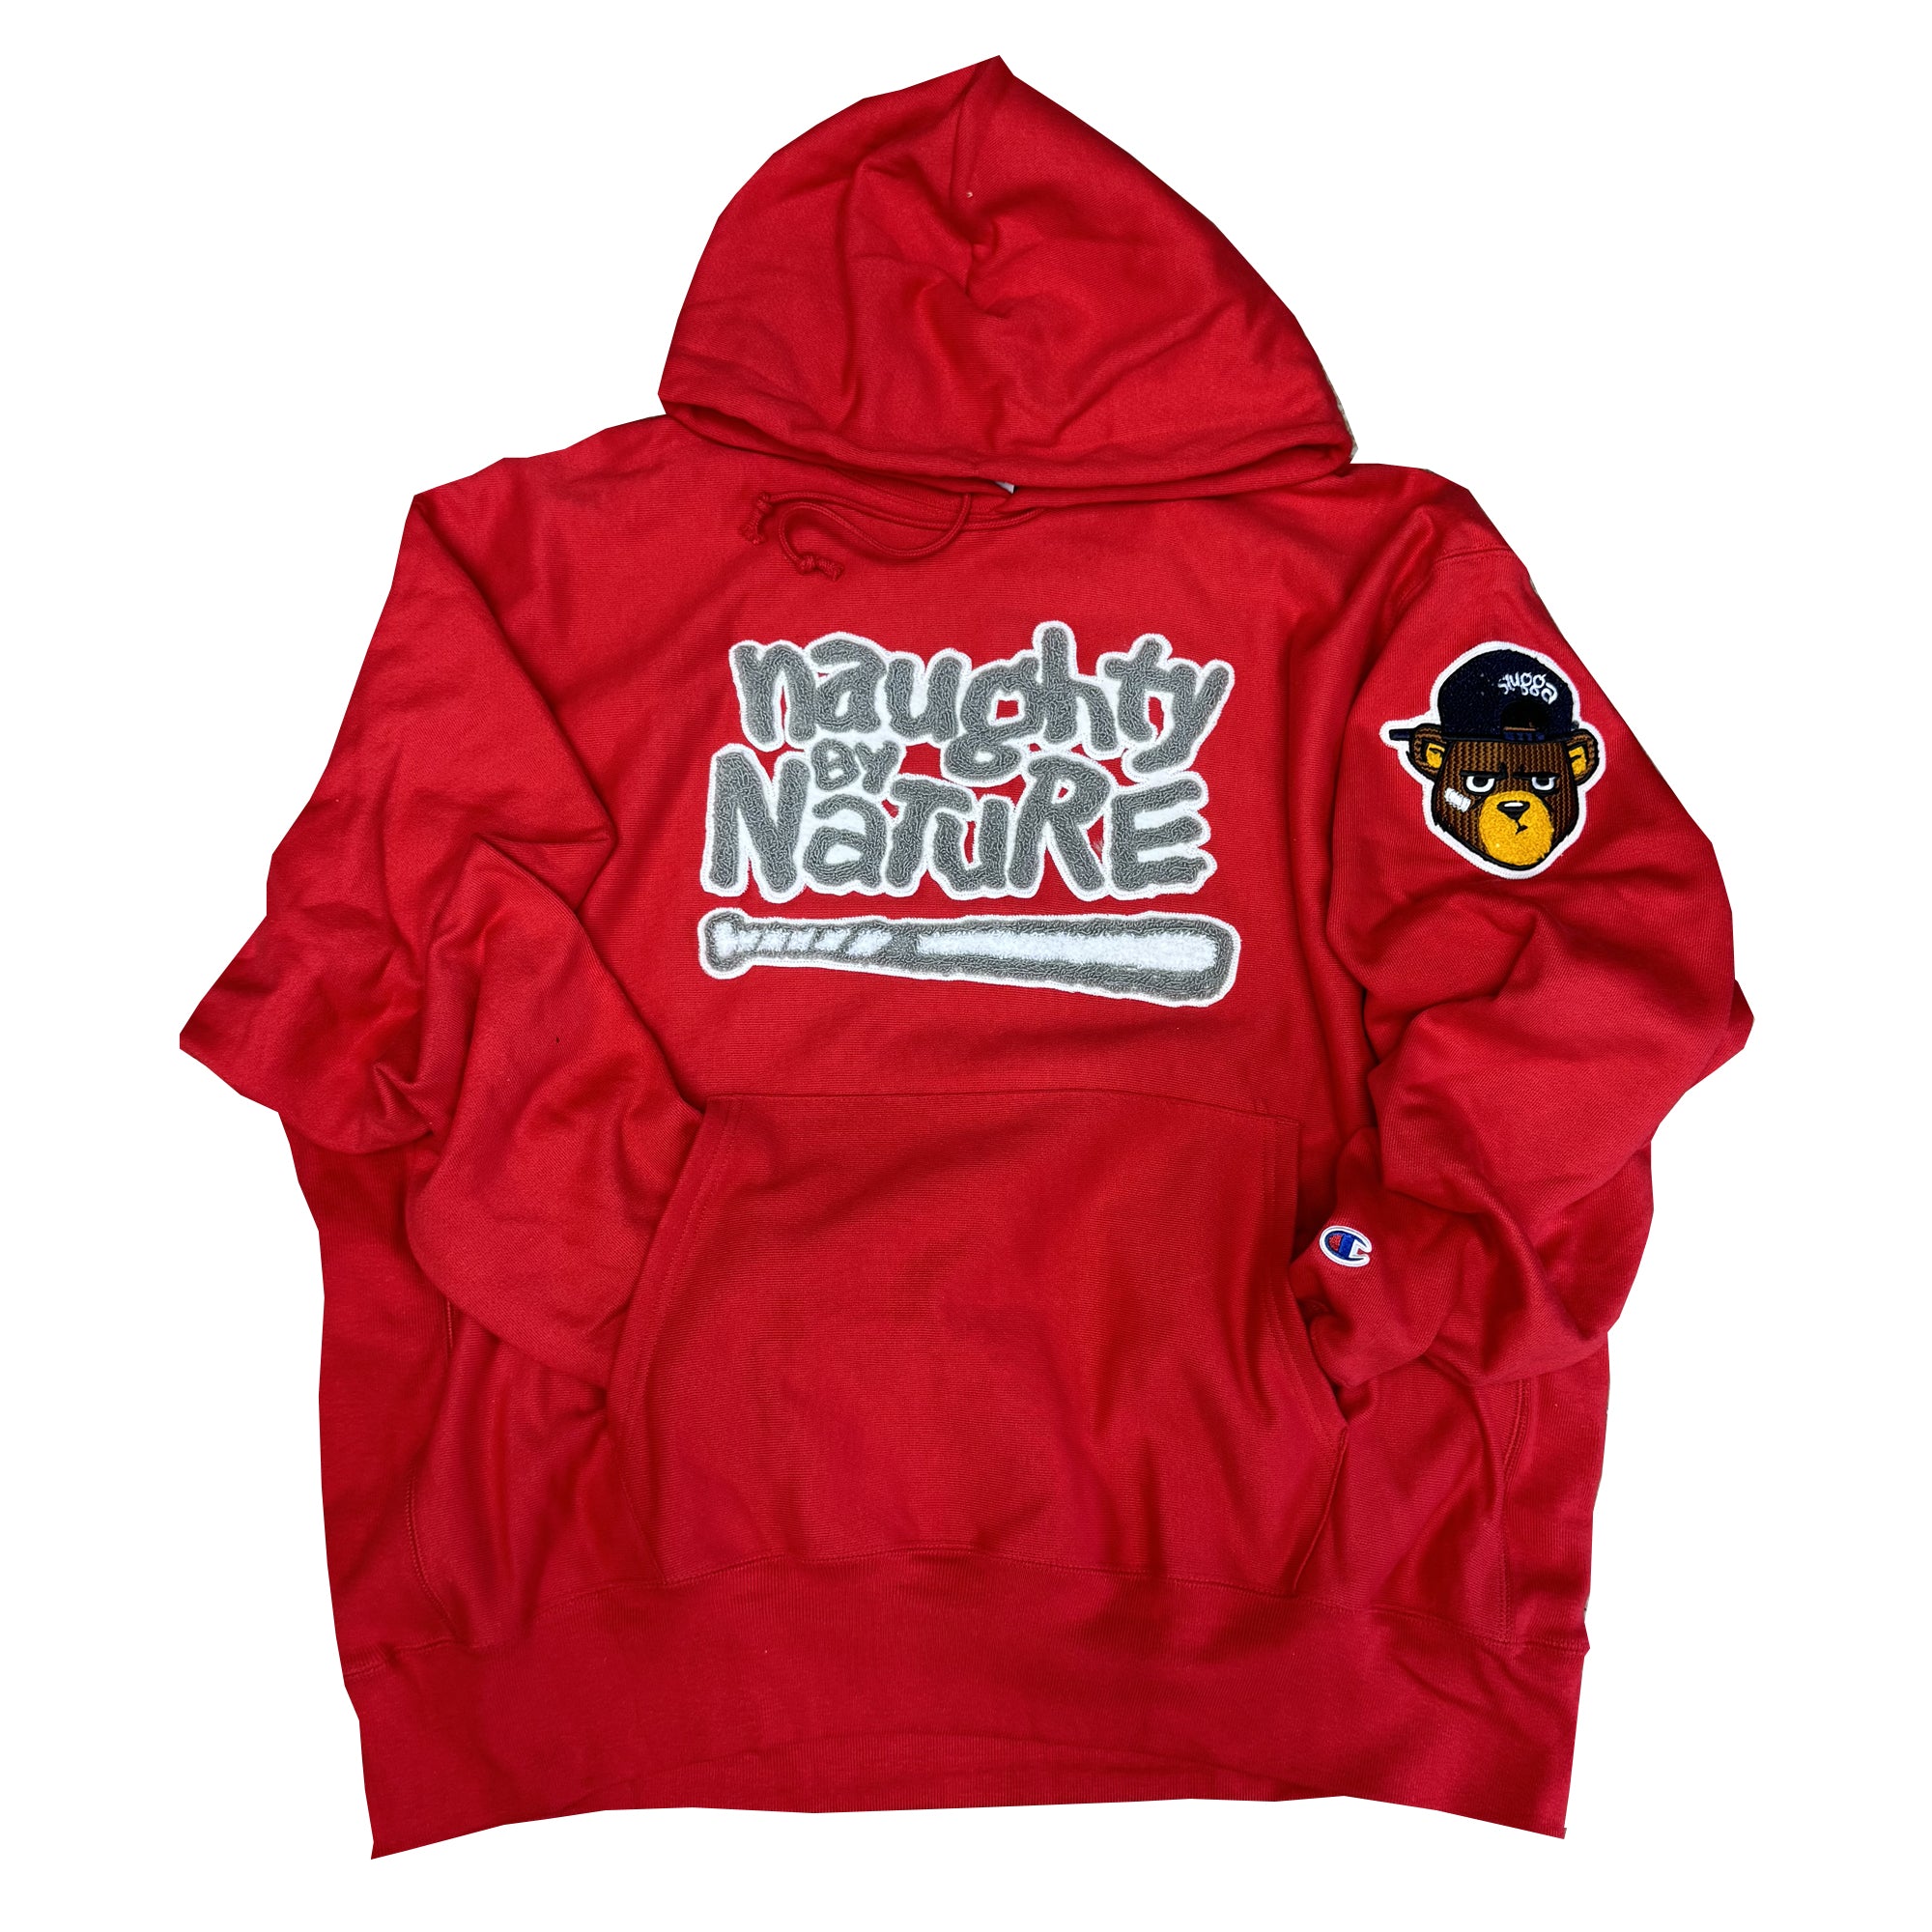 Slugga by Nature Hoodie - Red Edition